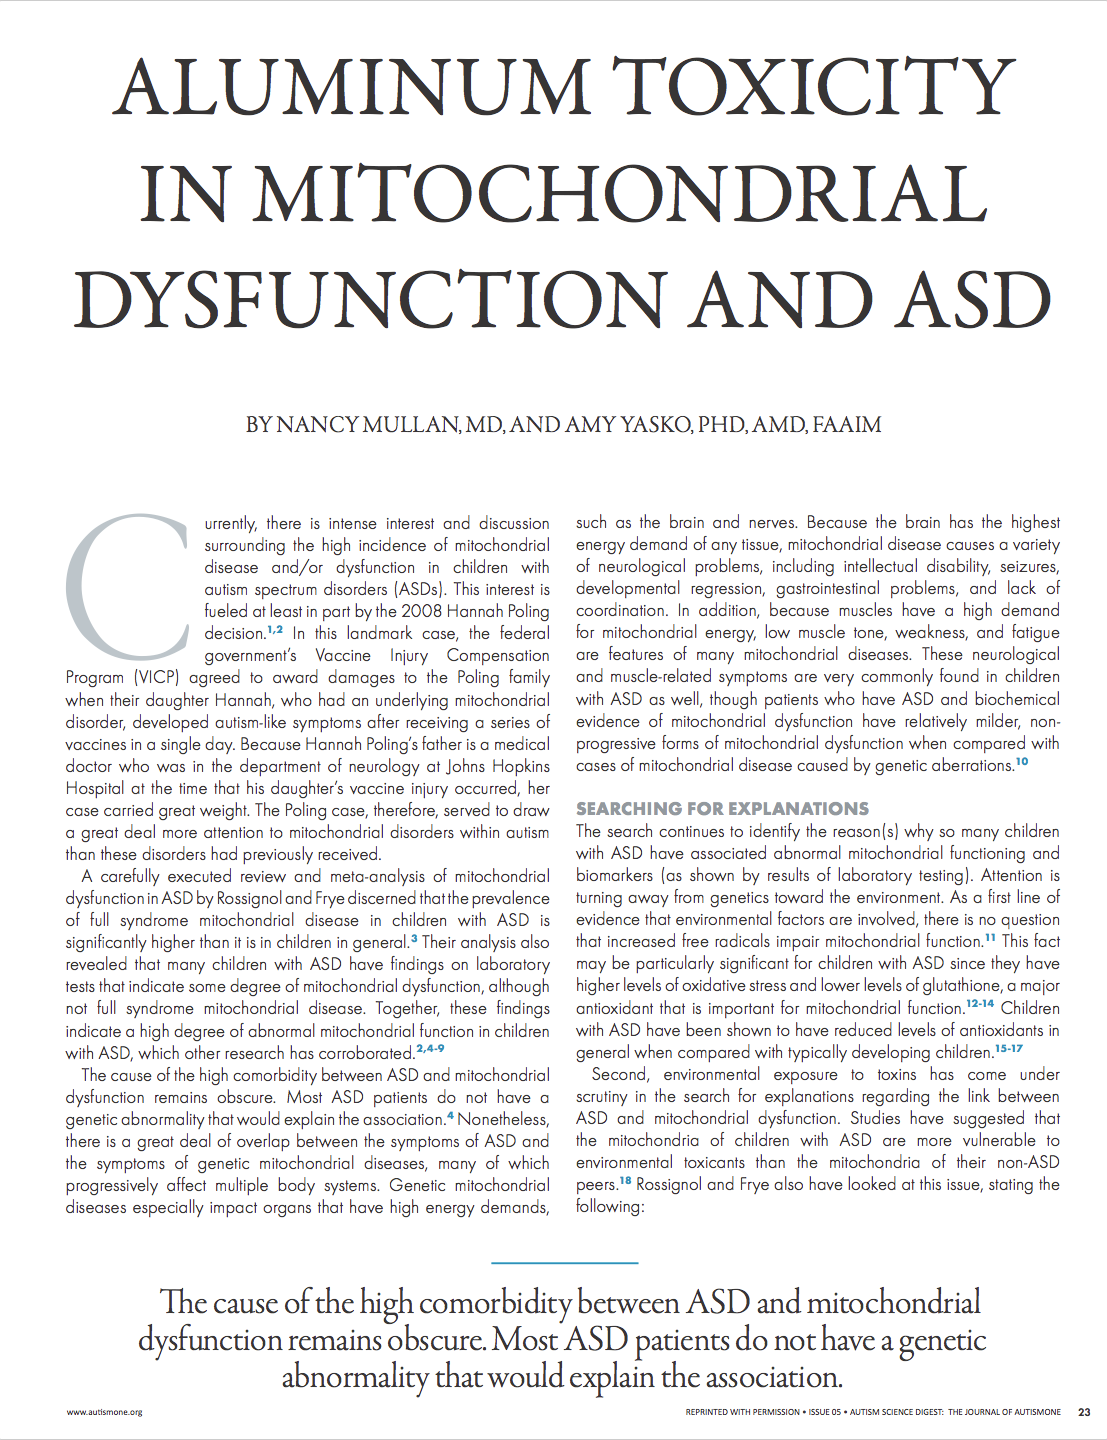 Aluminum Toxicity in Mitochondrial Dysfunction and ASD